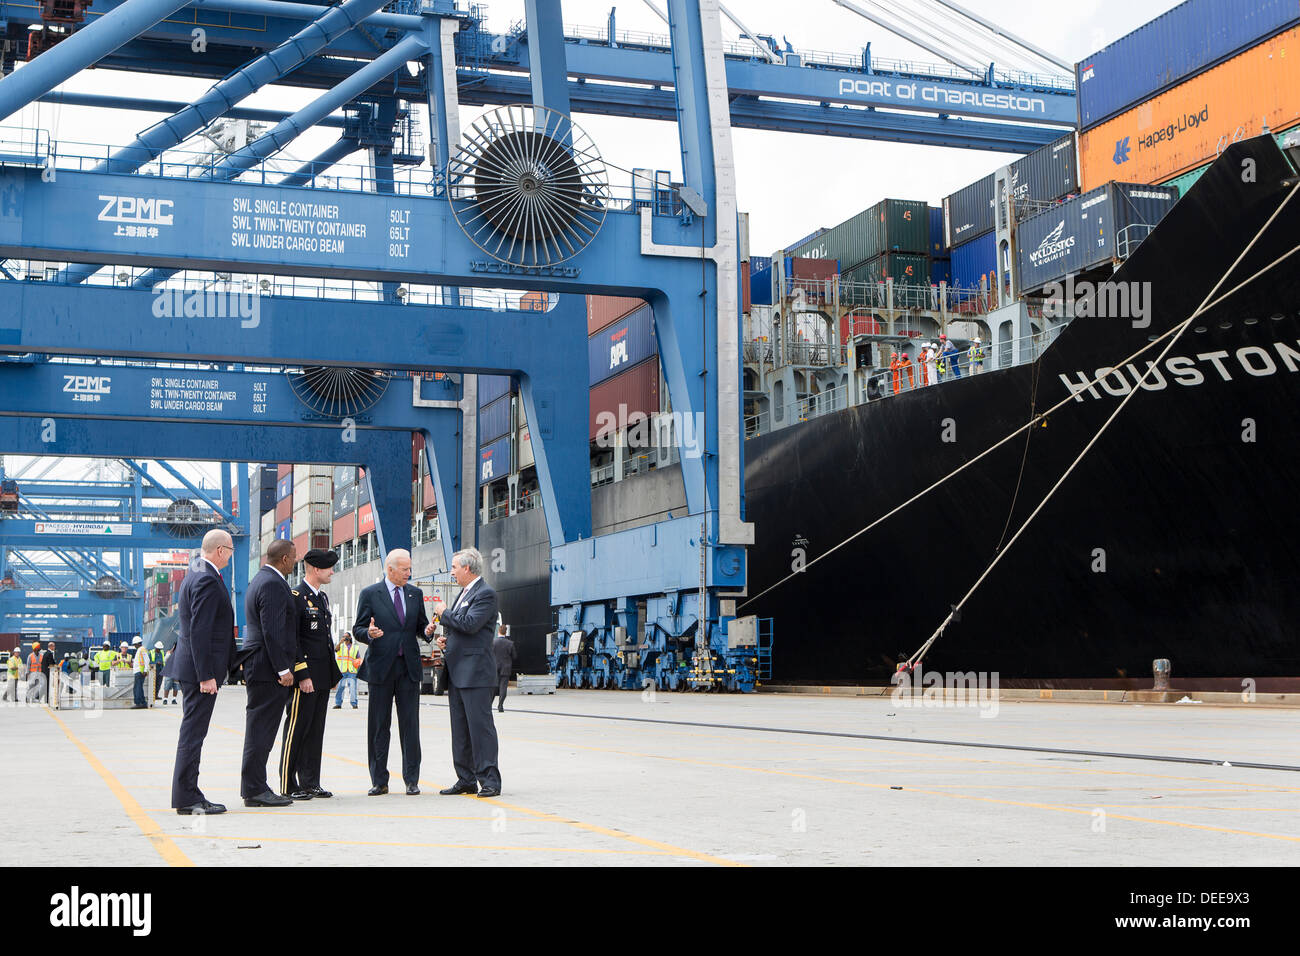 US Vice President Joe Biden speaks with Charleston Ports Authority CEO Jim Newsome, right, General Jackson and Transportation Secretary Anthony Foxx during a visit to Wando Welch Terminal on September 16, 2013 in Charleston, South Carolina. Biden spoke about the need to improve America's transportation infrastructure for exports and economic growth. Stock Photo